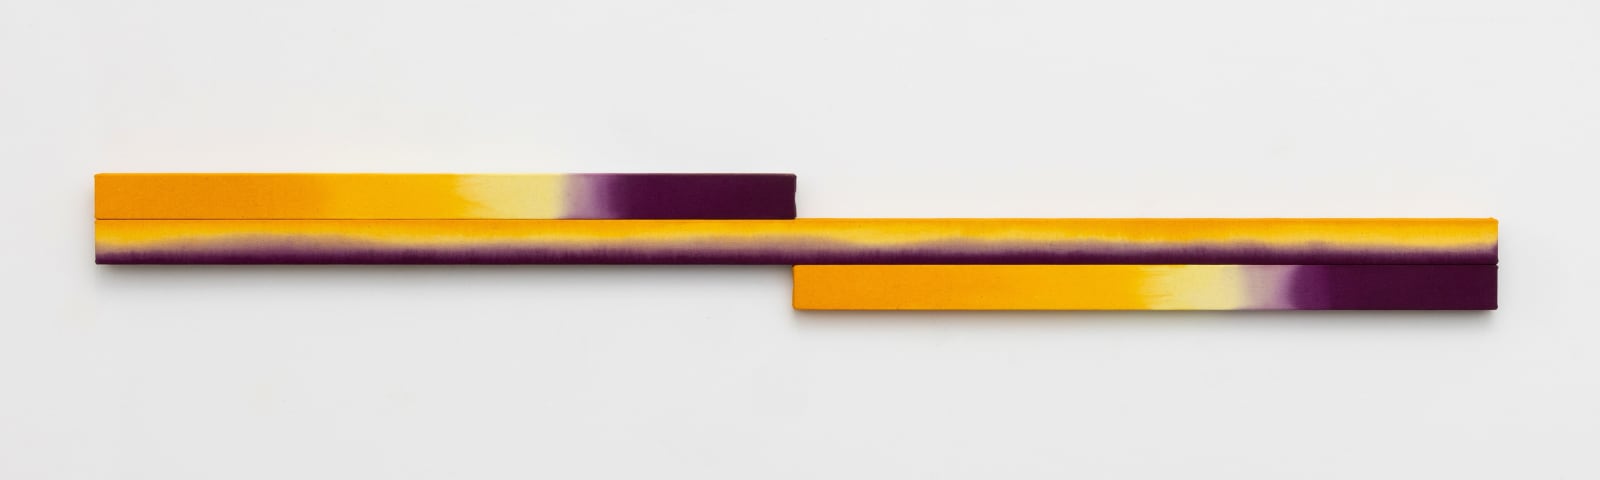 Horizontal shaped canvas painting stretched on three wooden bars varying in length and colors of orange, yellow, and purple.